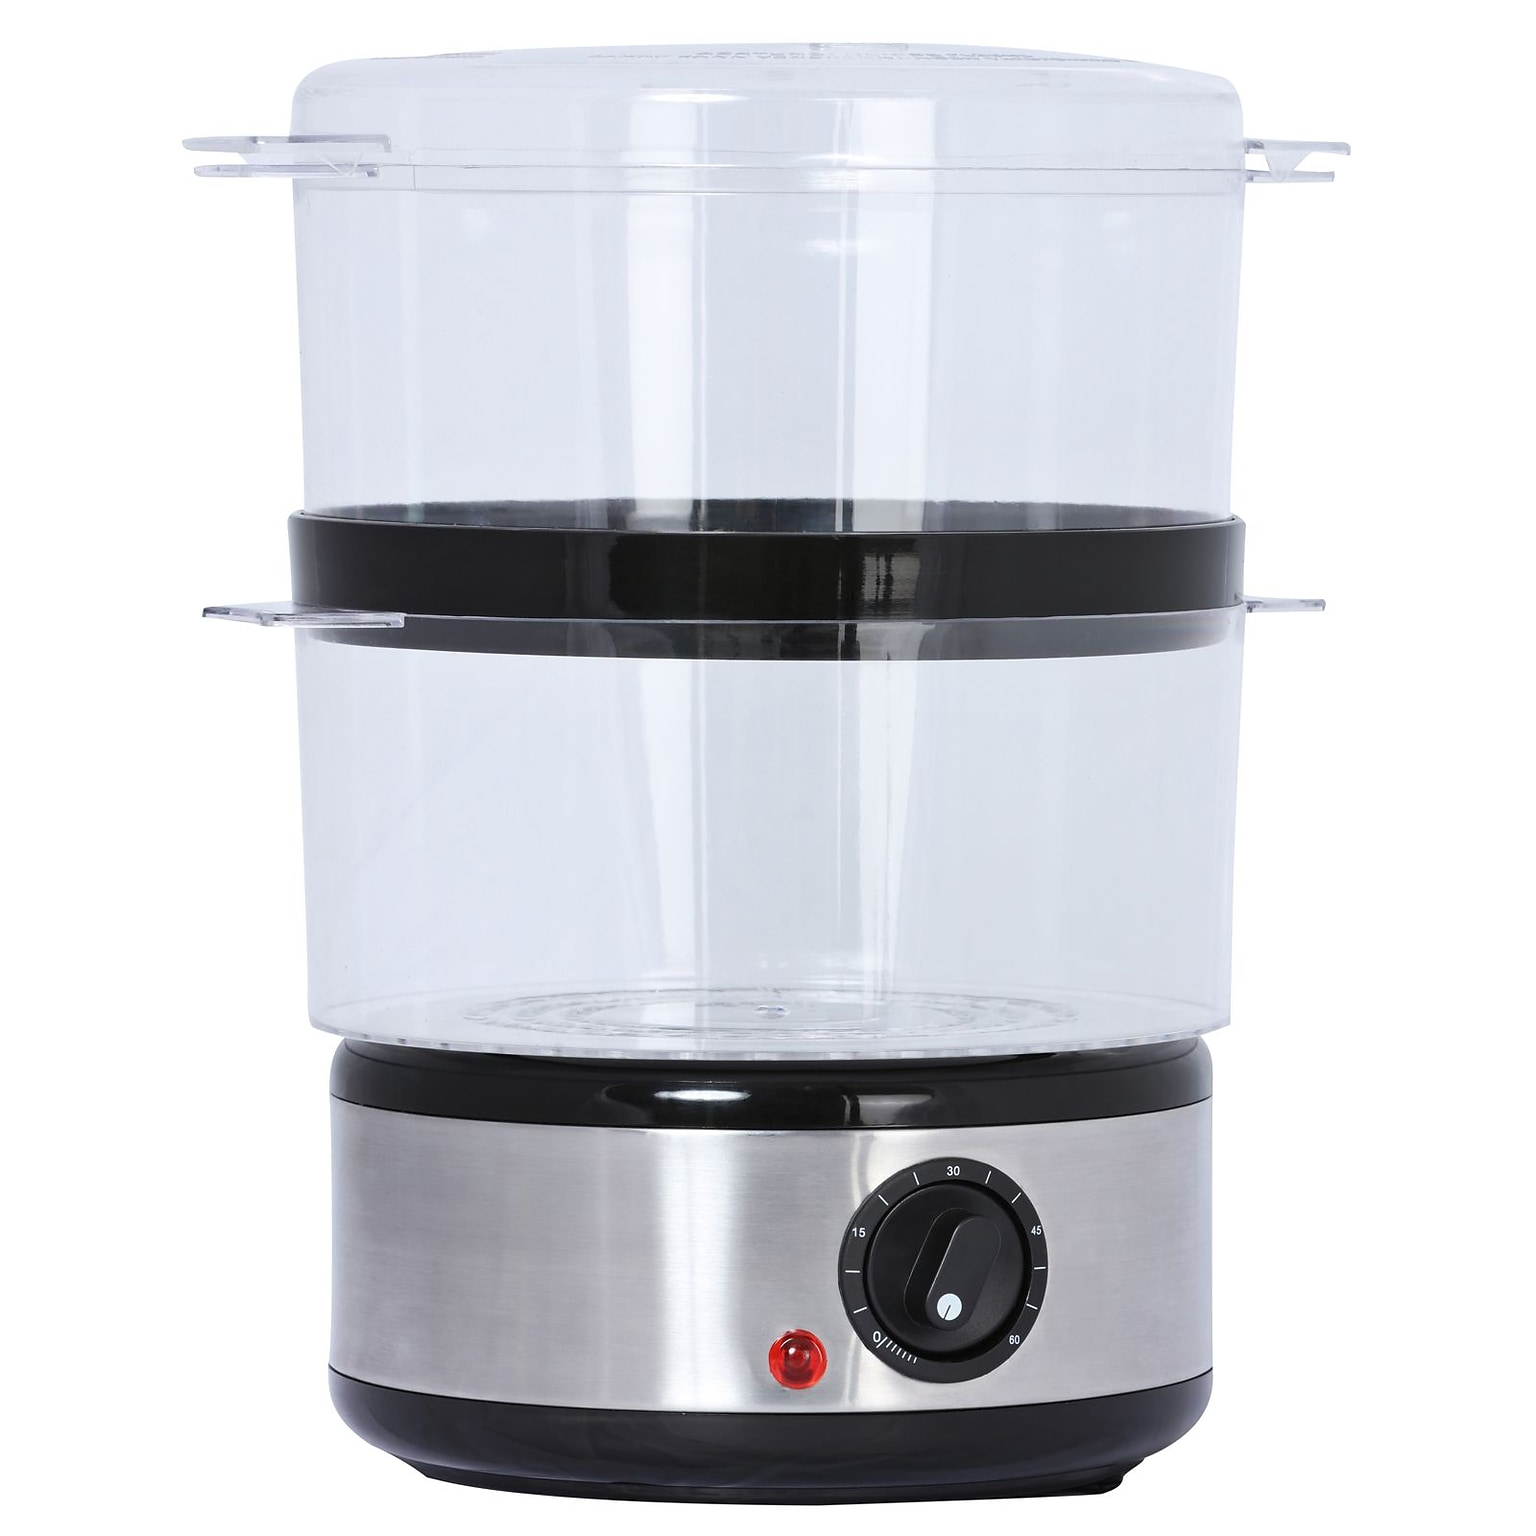 Brentwood 2 Tier Food Steamer (TS-1005)